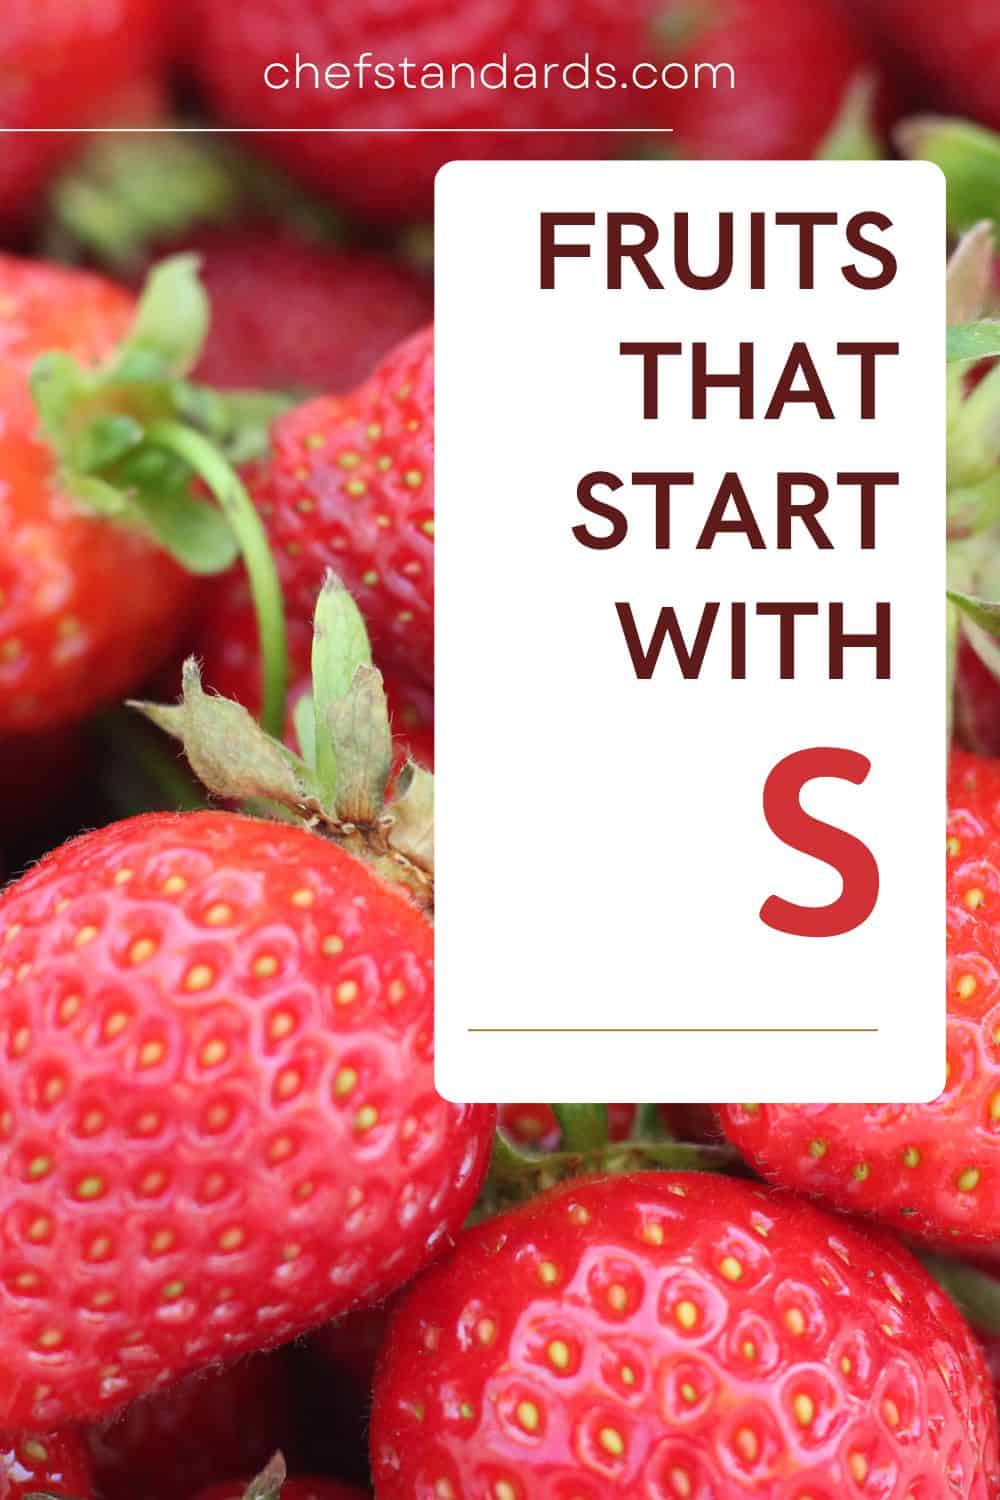 30 Fruits That Start With S (+ Interesting Facts)
